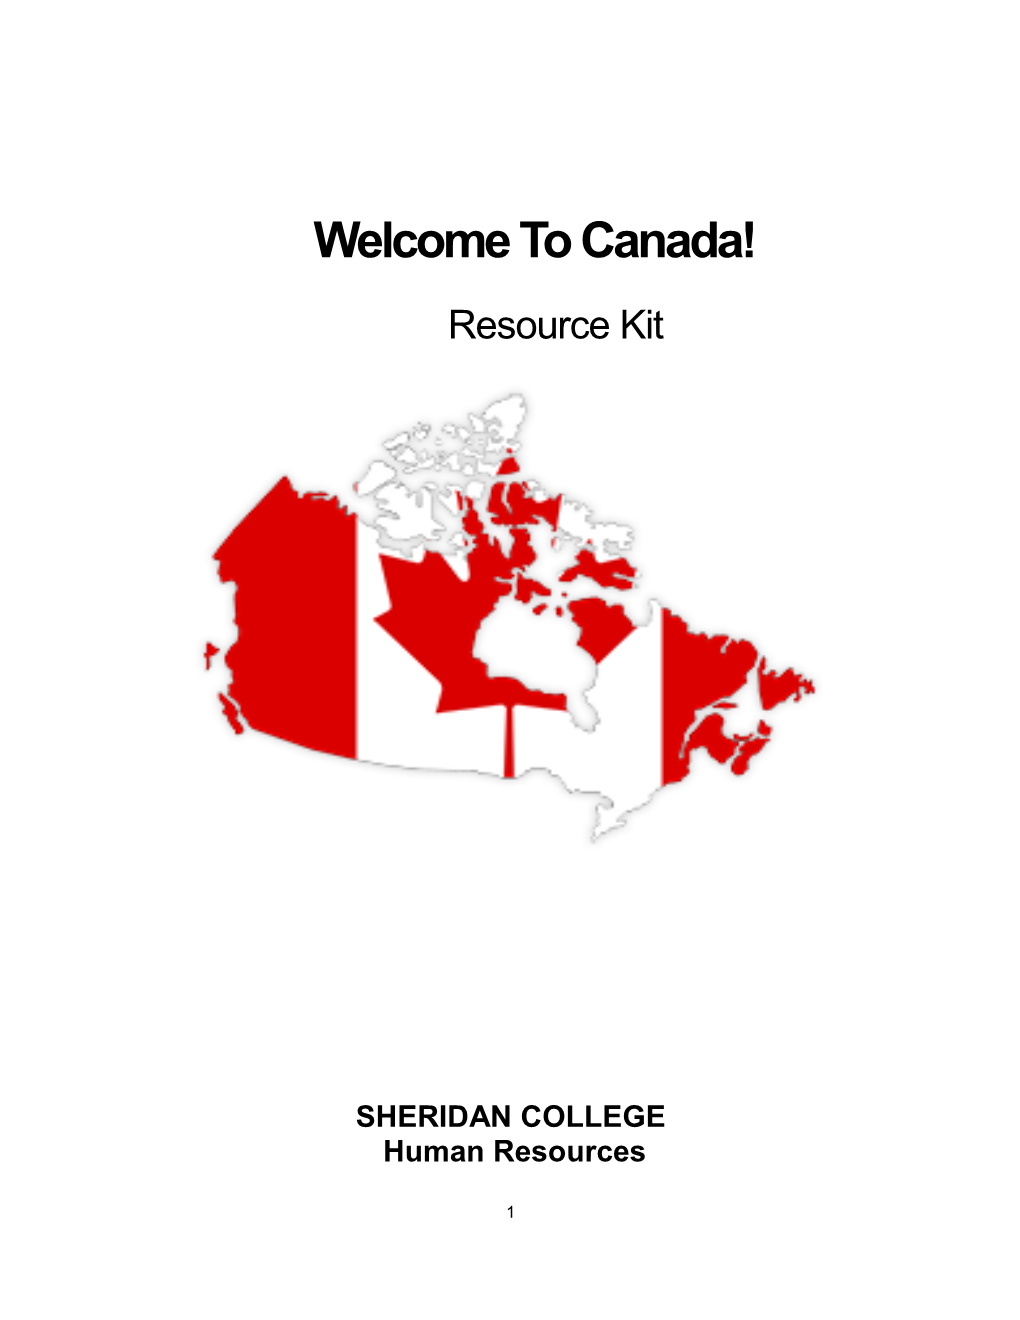 Welcome to Canada Resource